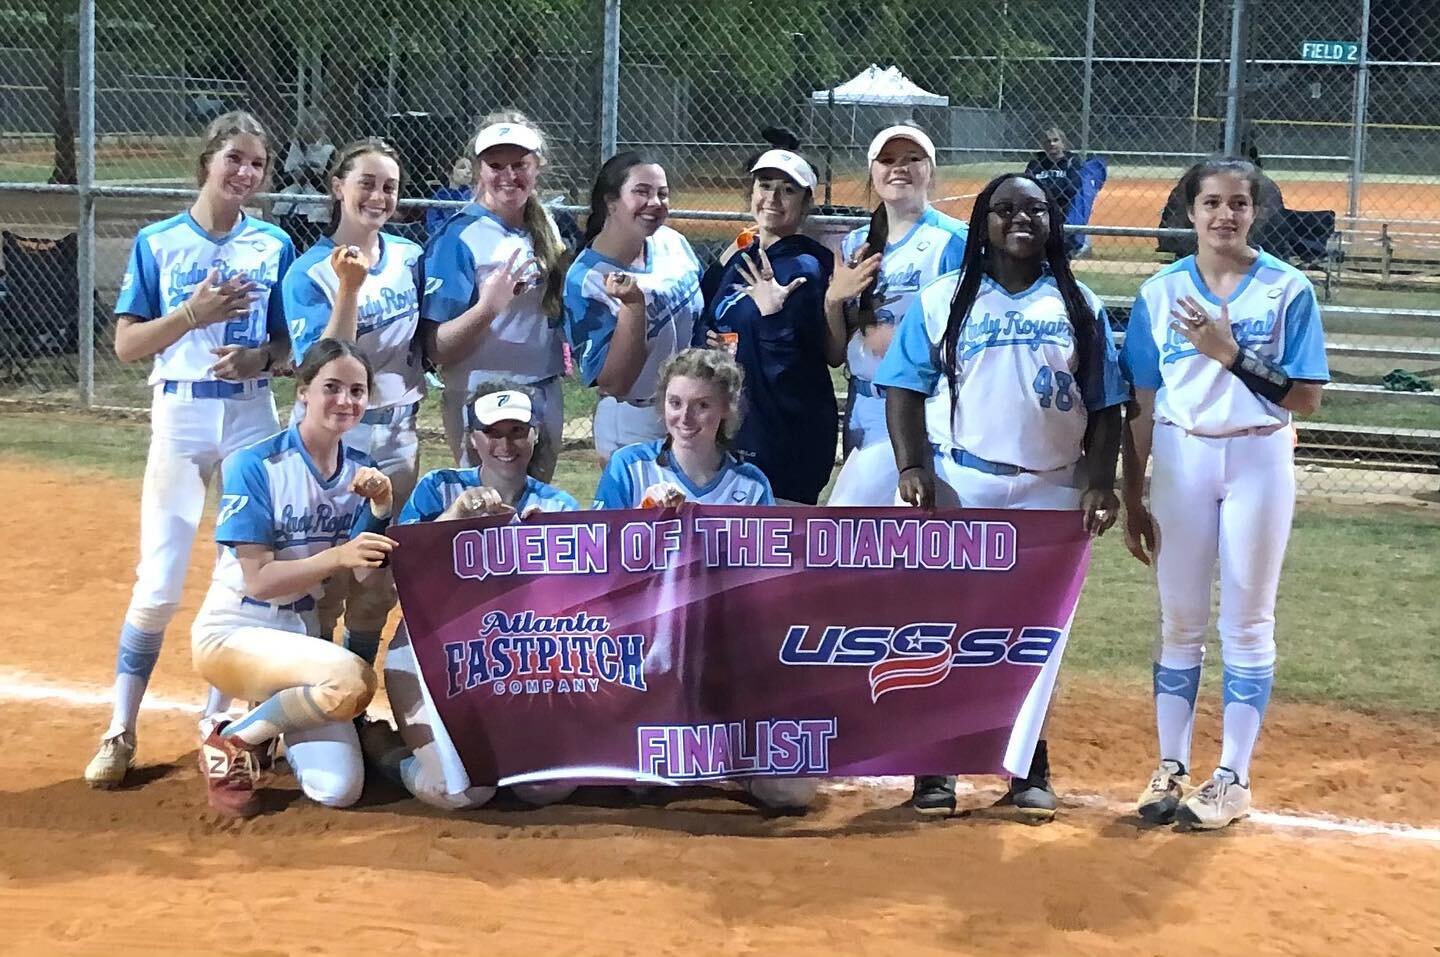 Congrats to the 7I Lady Royals-Rohan for coming in second at the USSSA Queen of Diamonds Tournament this weekend!